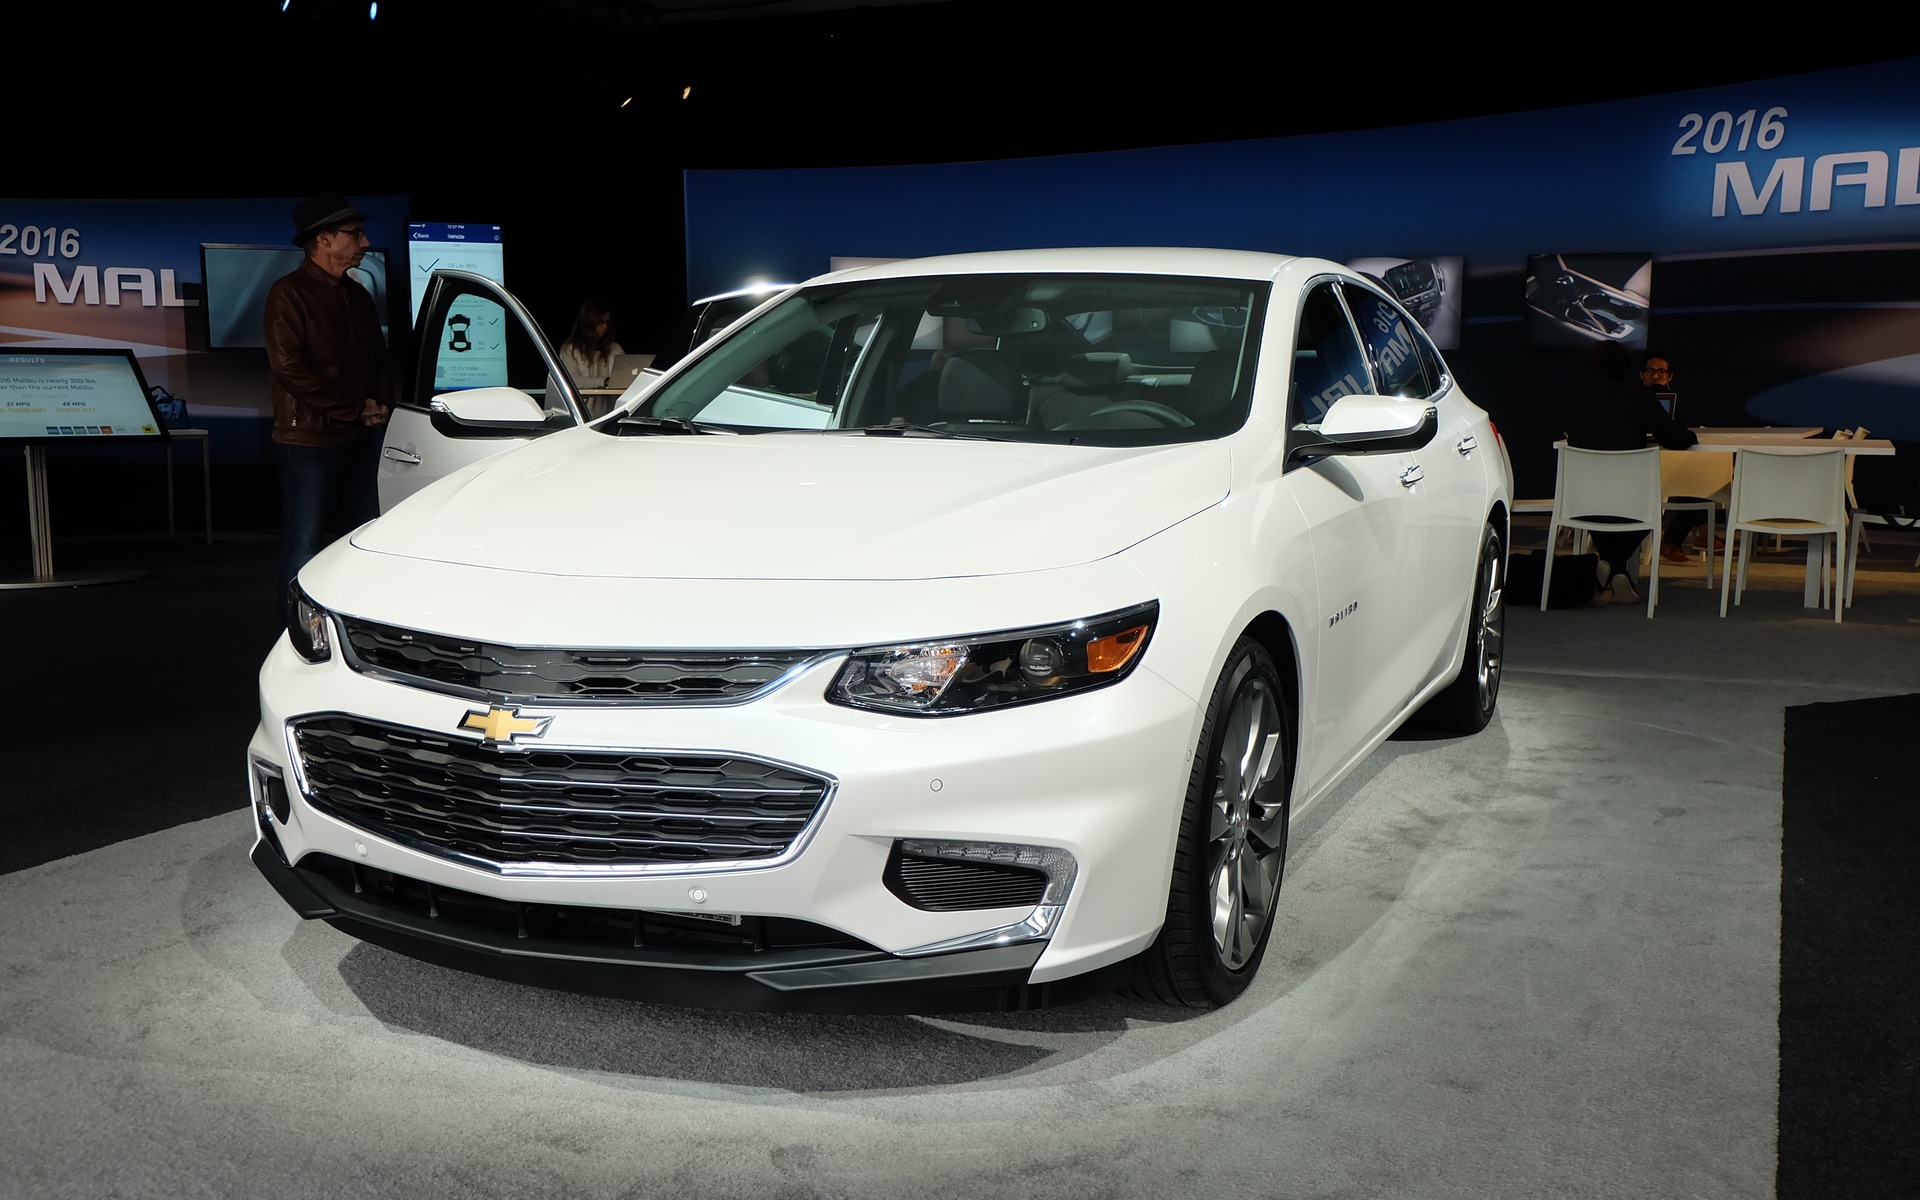 The 2016 Chevrolet Malibu is particularly chic in white